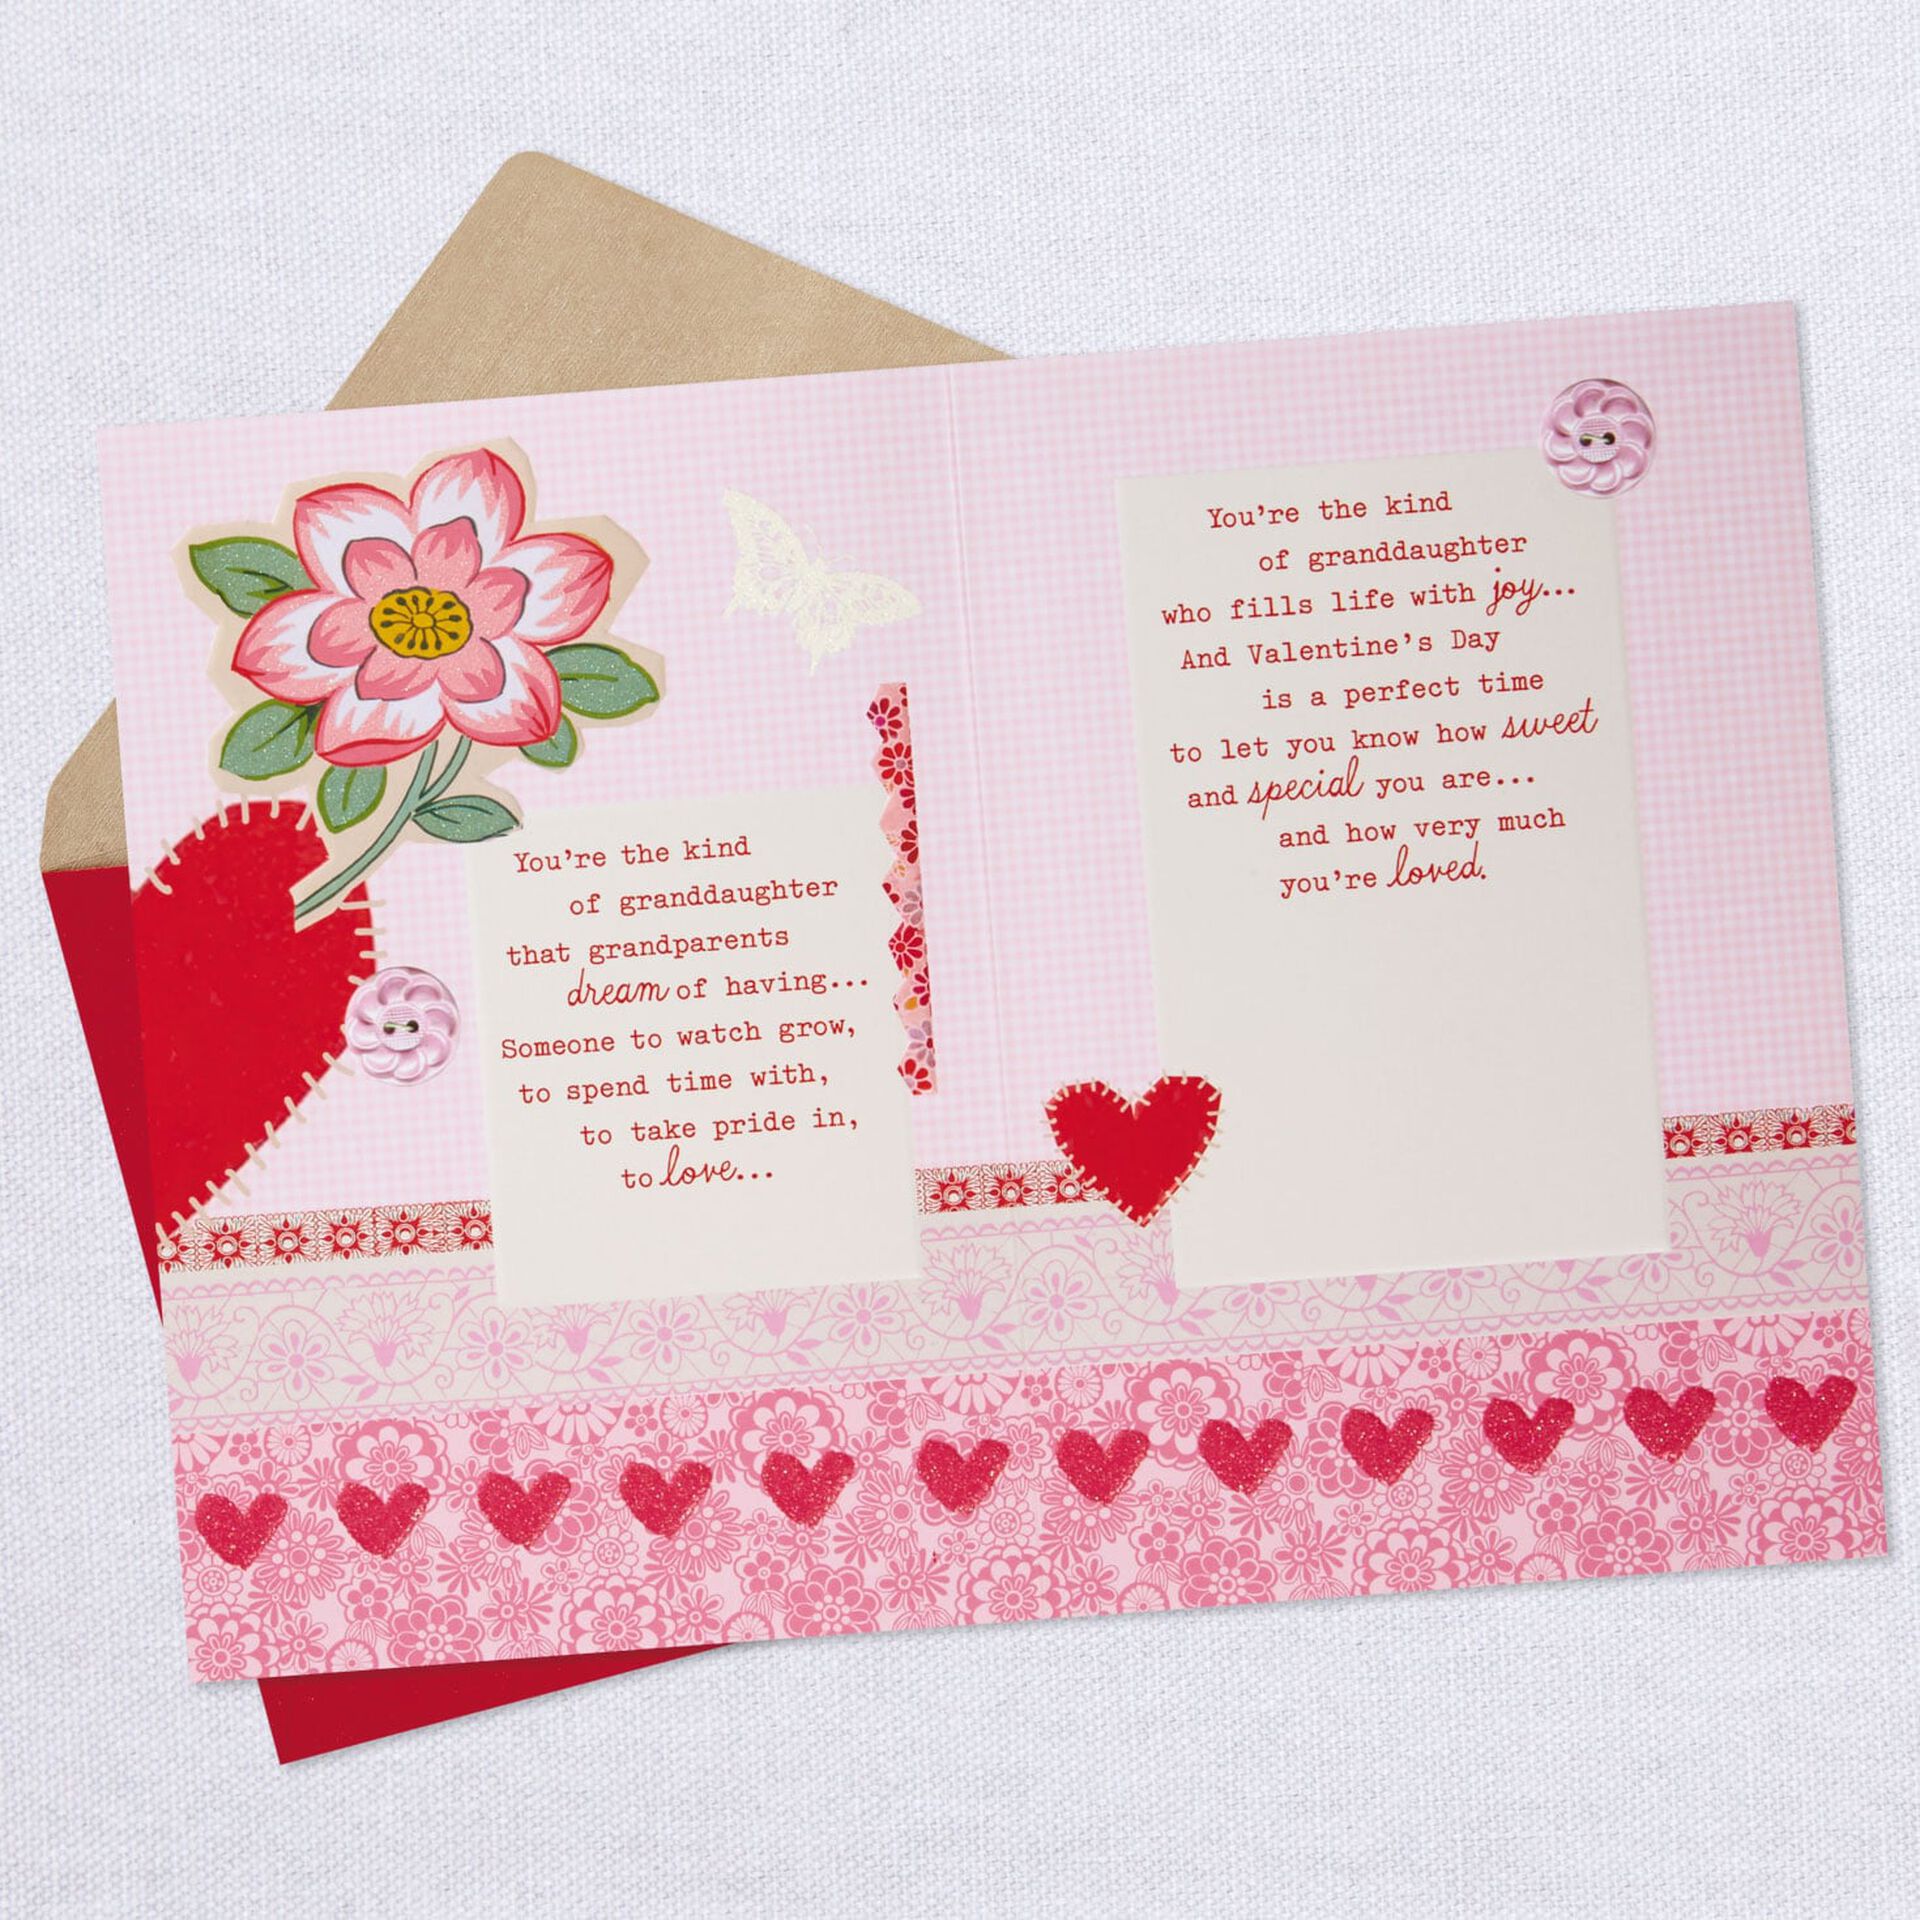 you-re-loved-so-much-valentine-s-day-card-for-granddaughter-greeting